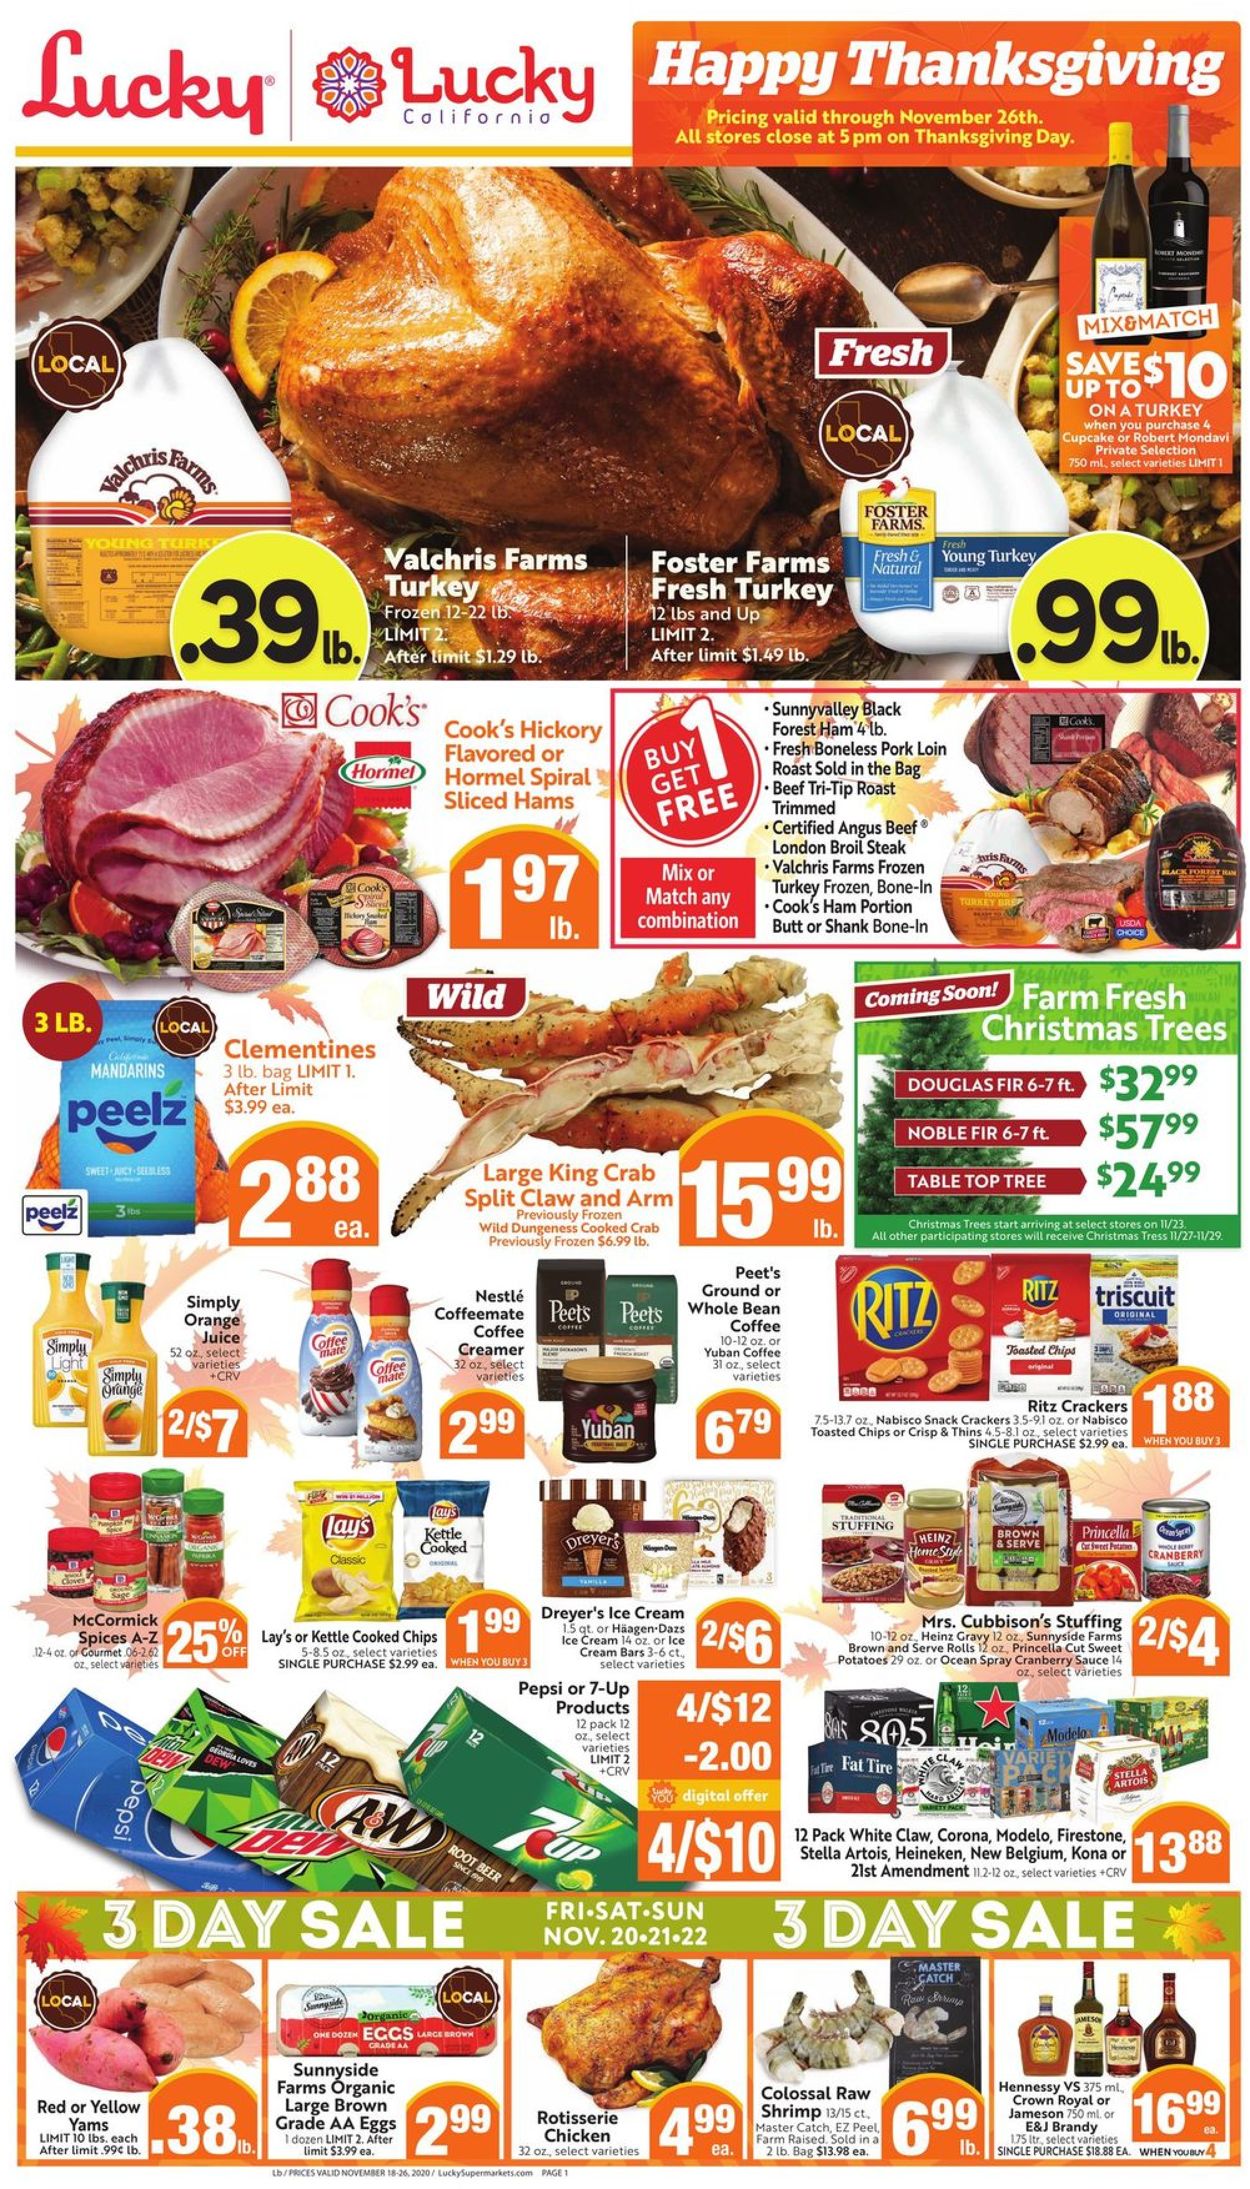 Lucky Supermarkets Thanksgiving ad 2020 Weekly Ad Circular - valid 11/18-11/26/2020